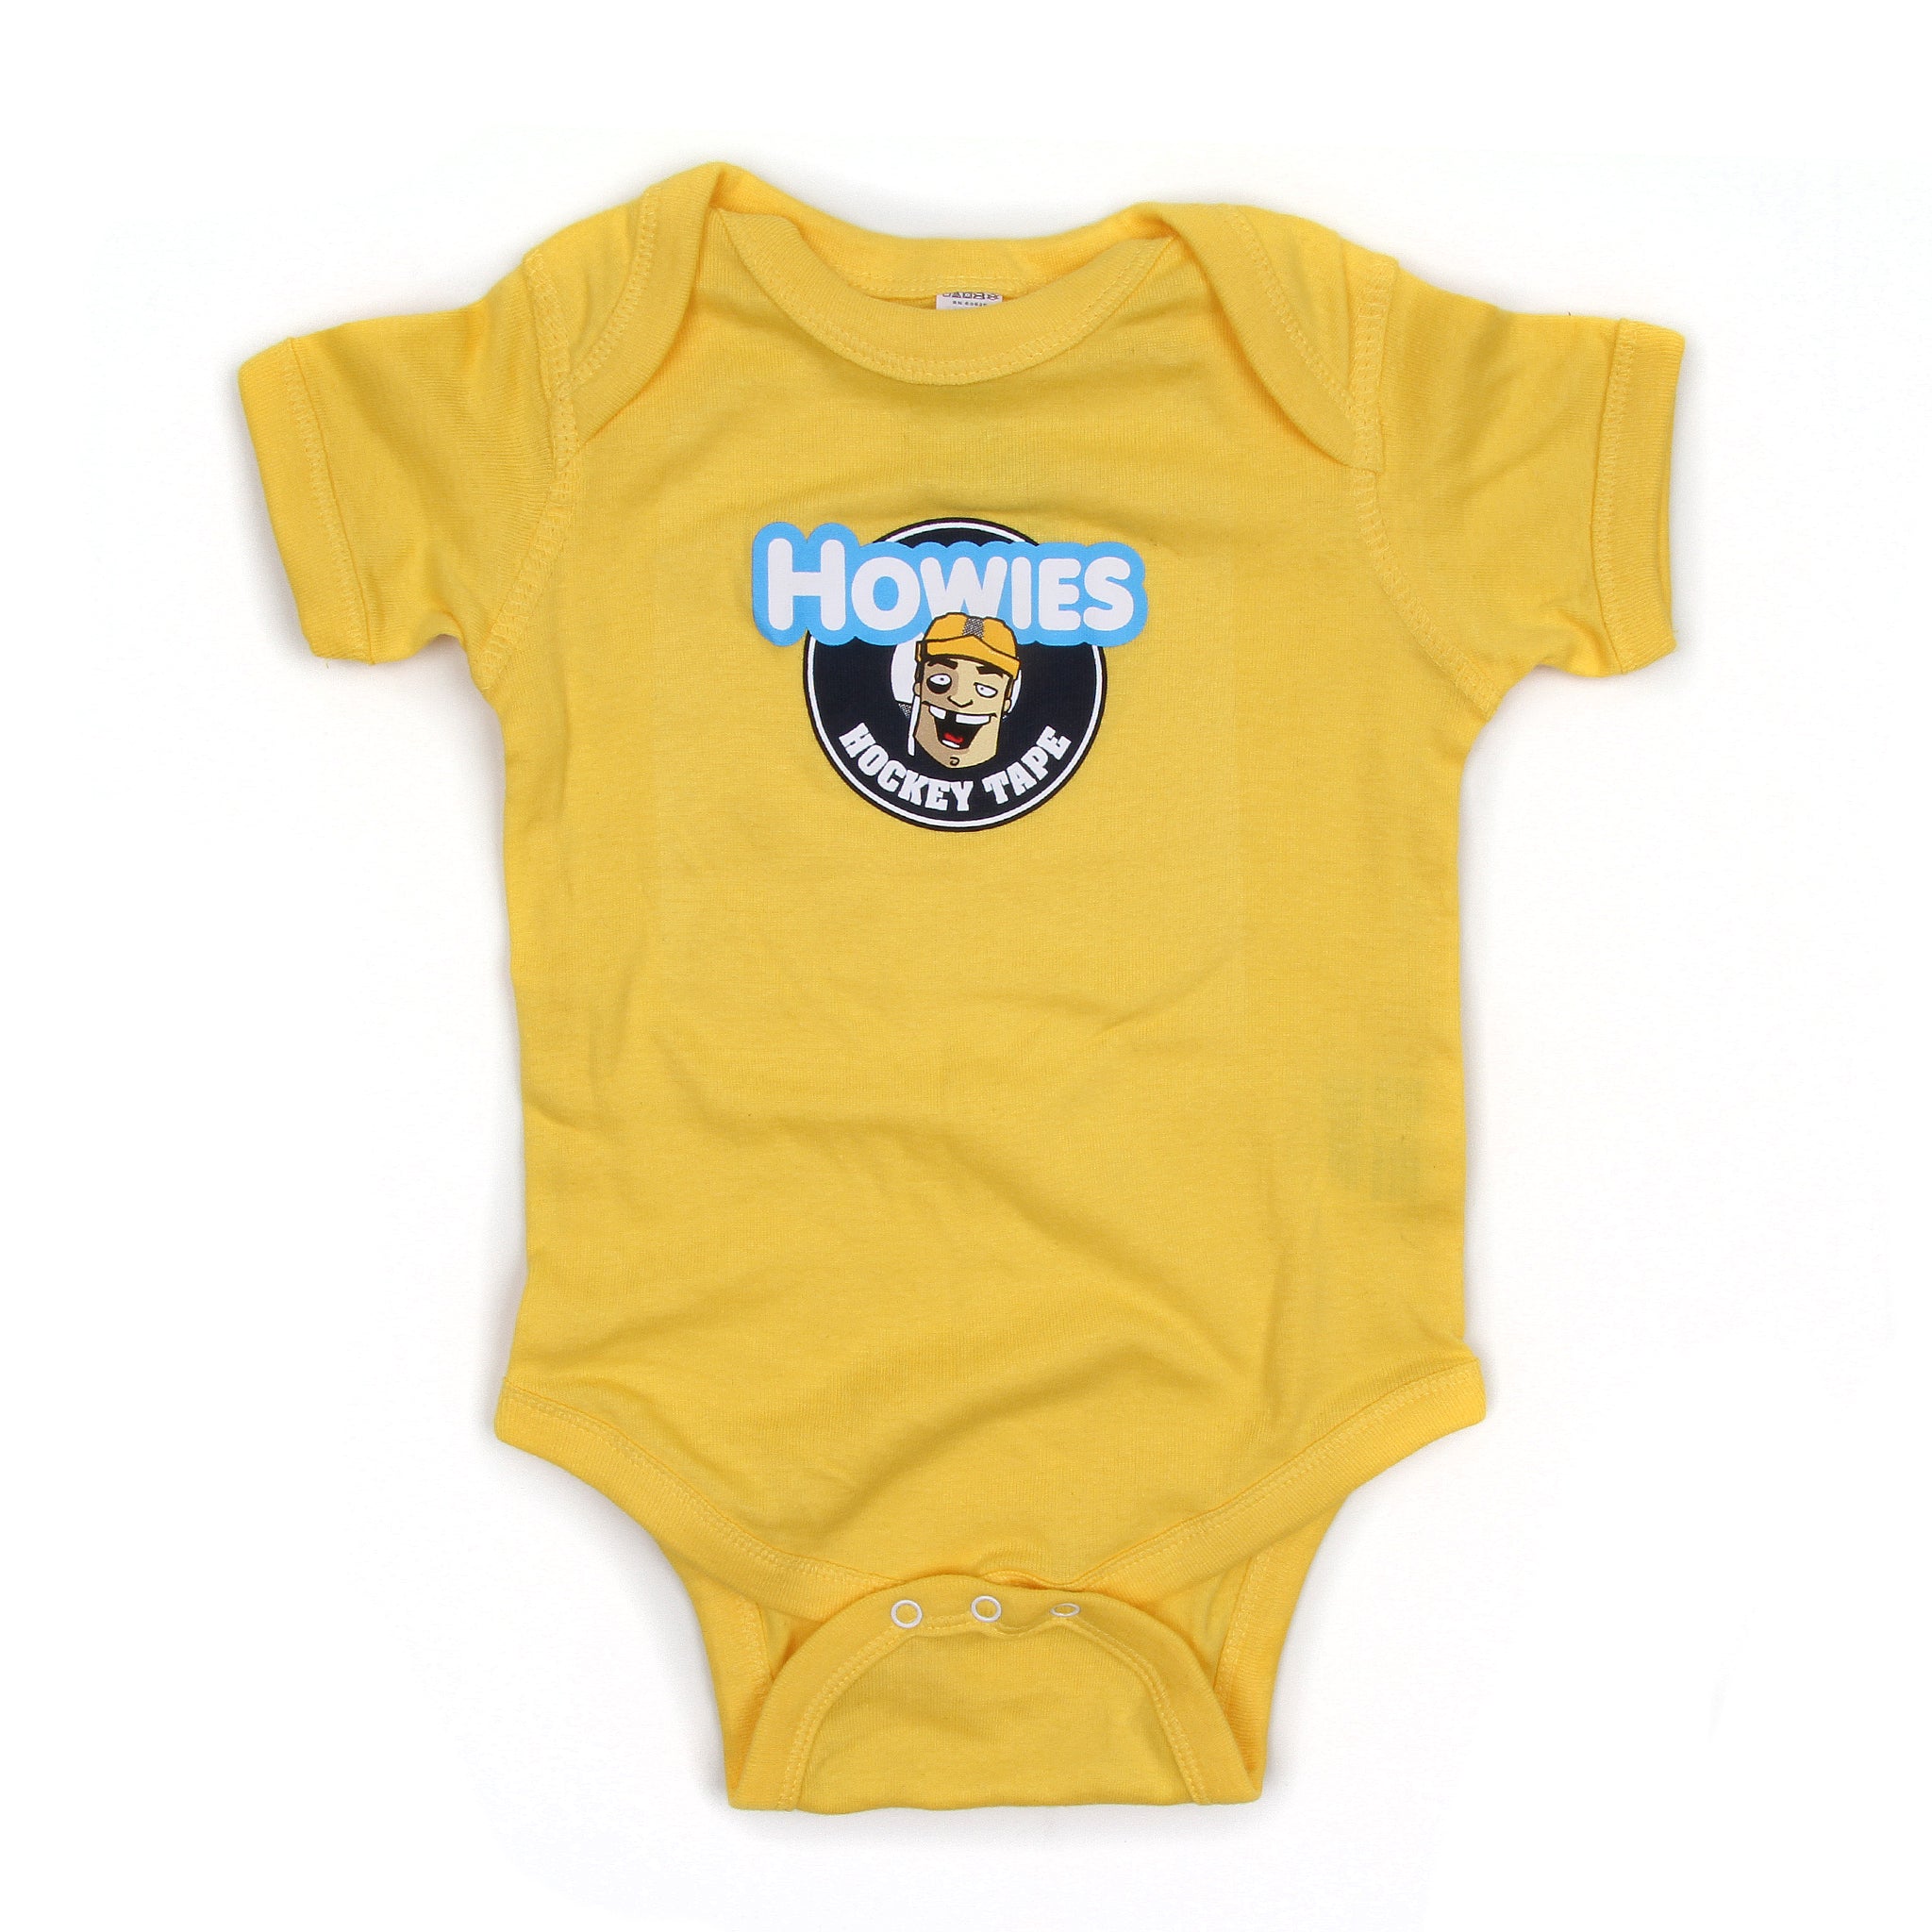 Tell Me 90s Onesie - Shop for Baby Girl Outfits - Baby Bae Boutique